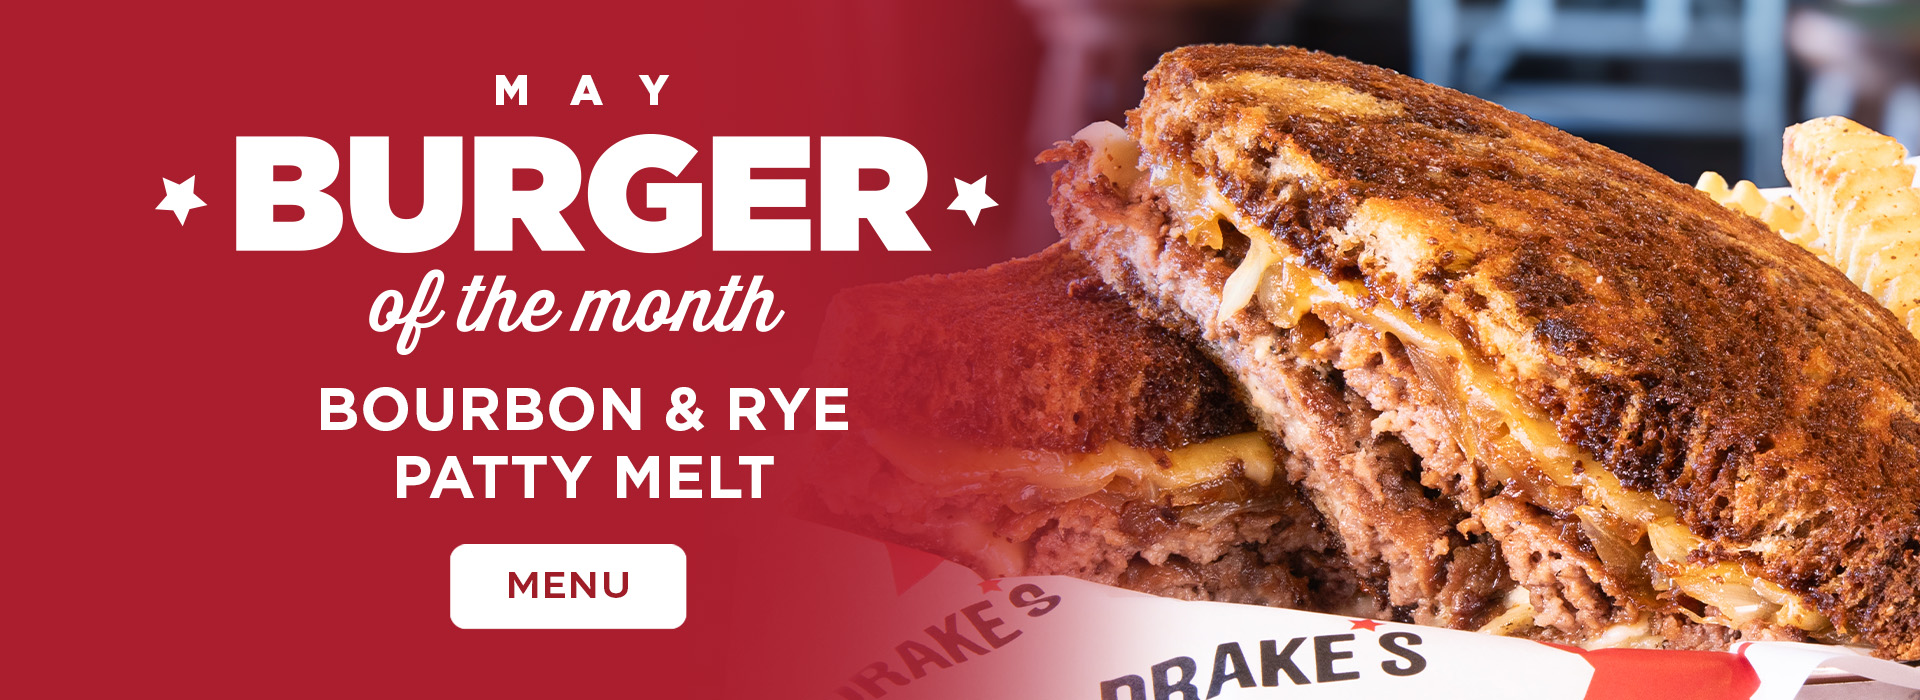 Click or tap here to see our burger of the month special!